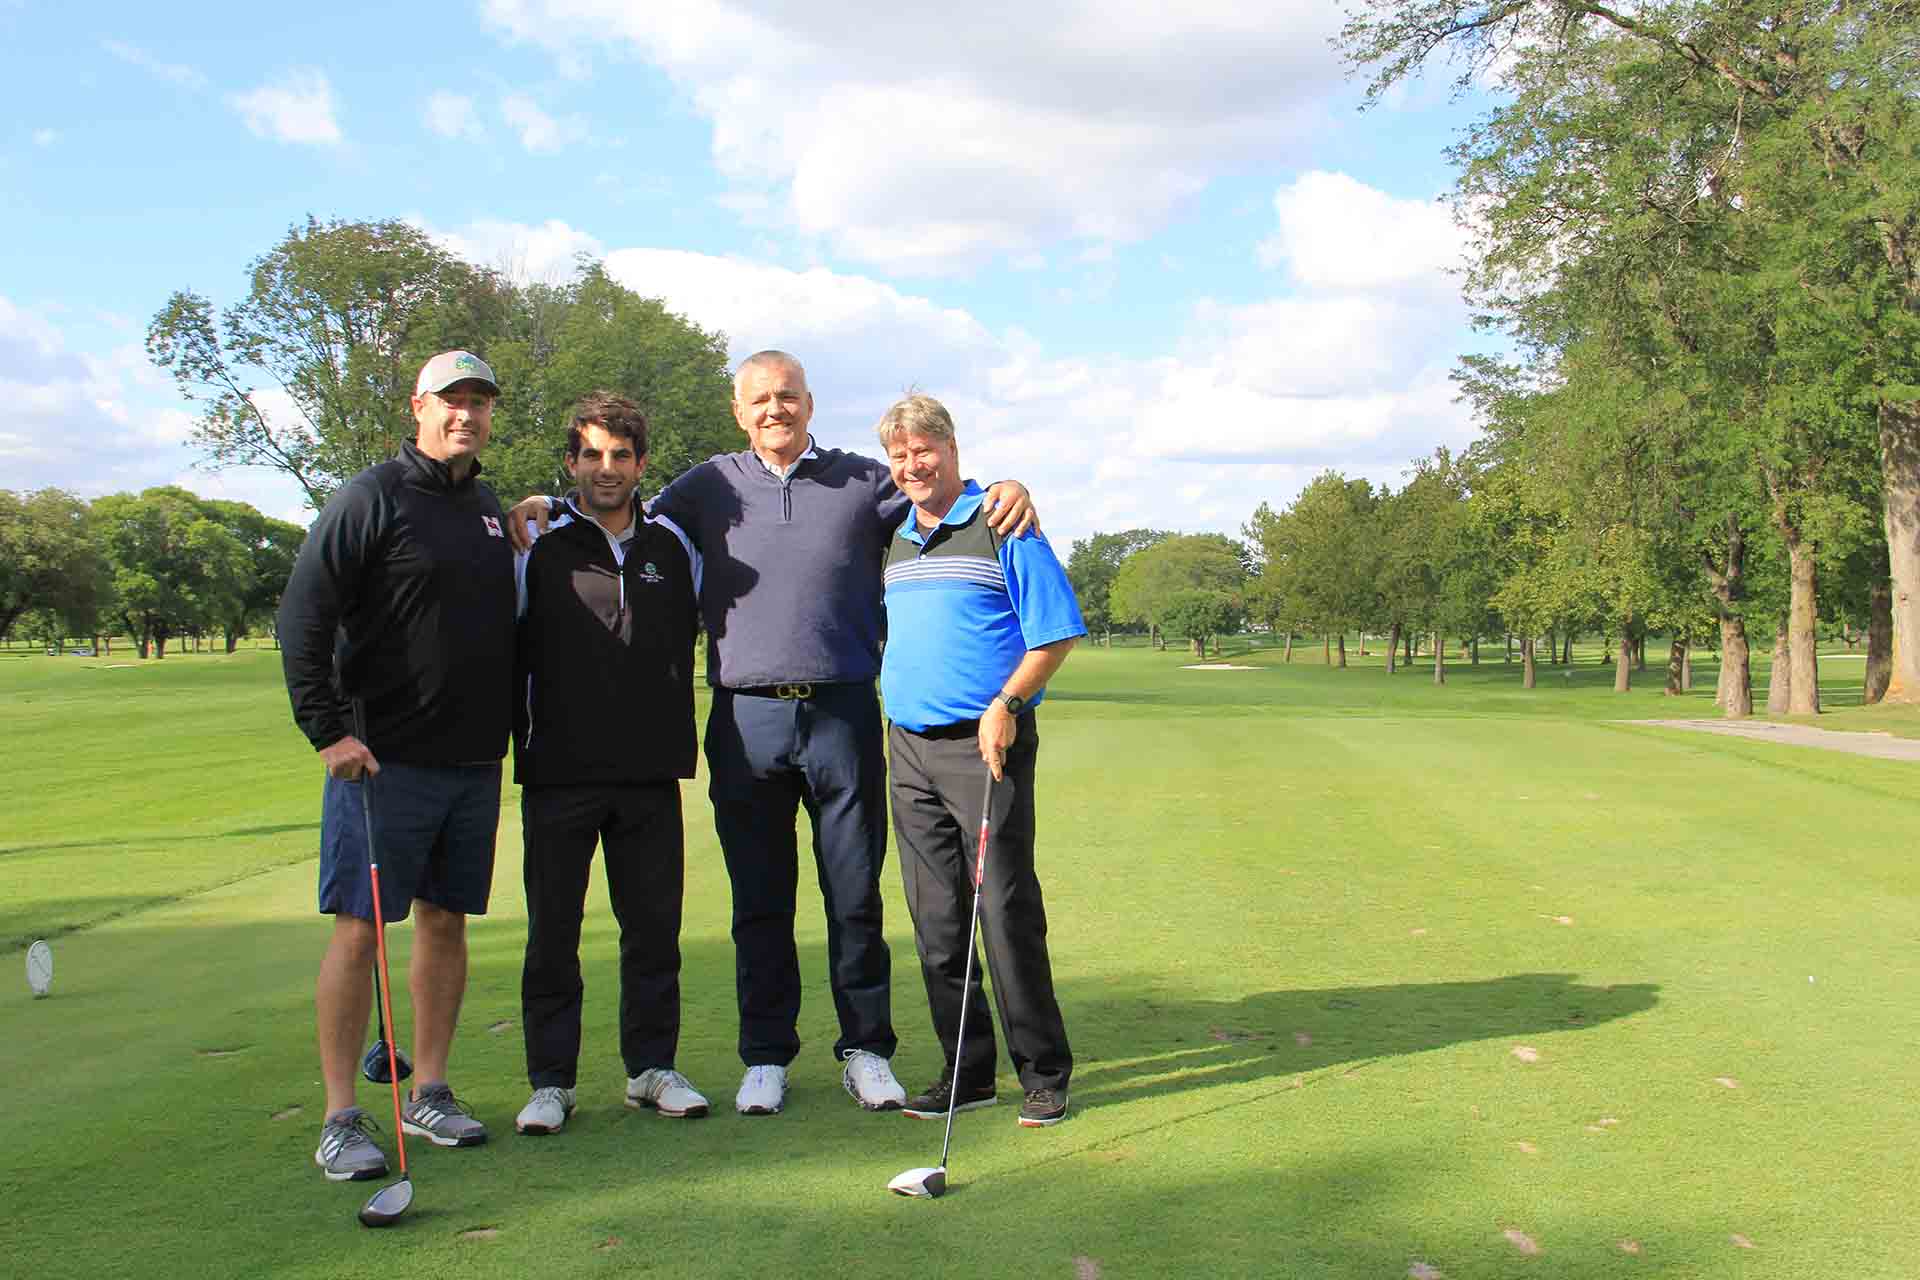 2022-Endowment-Golf-Classic-four-people-standing-for-group-photo-on-golf-course